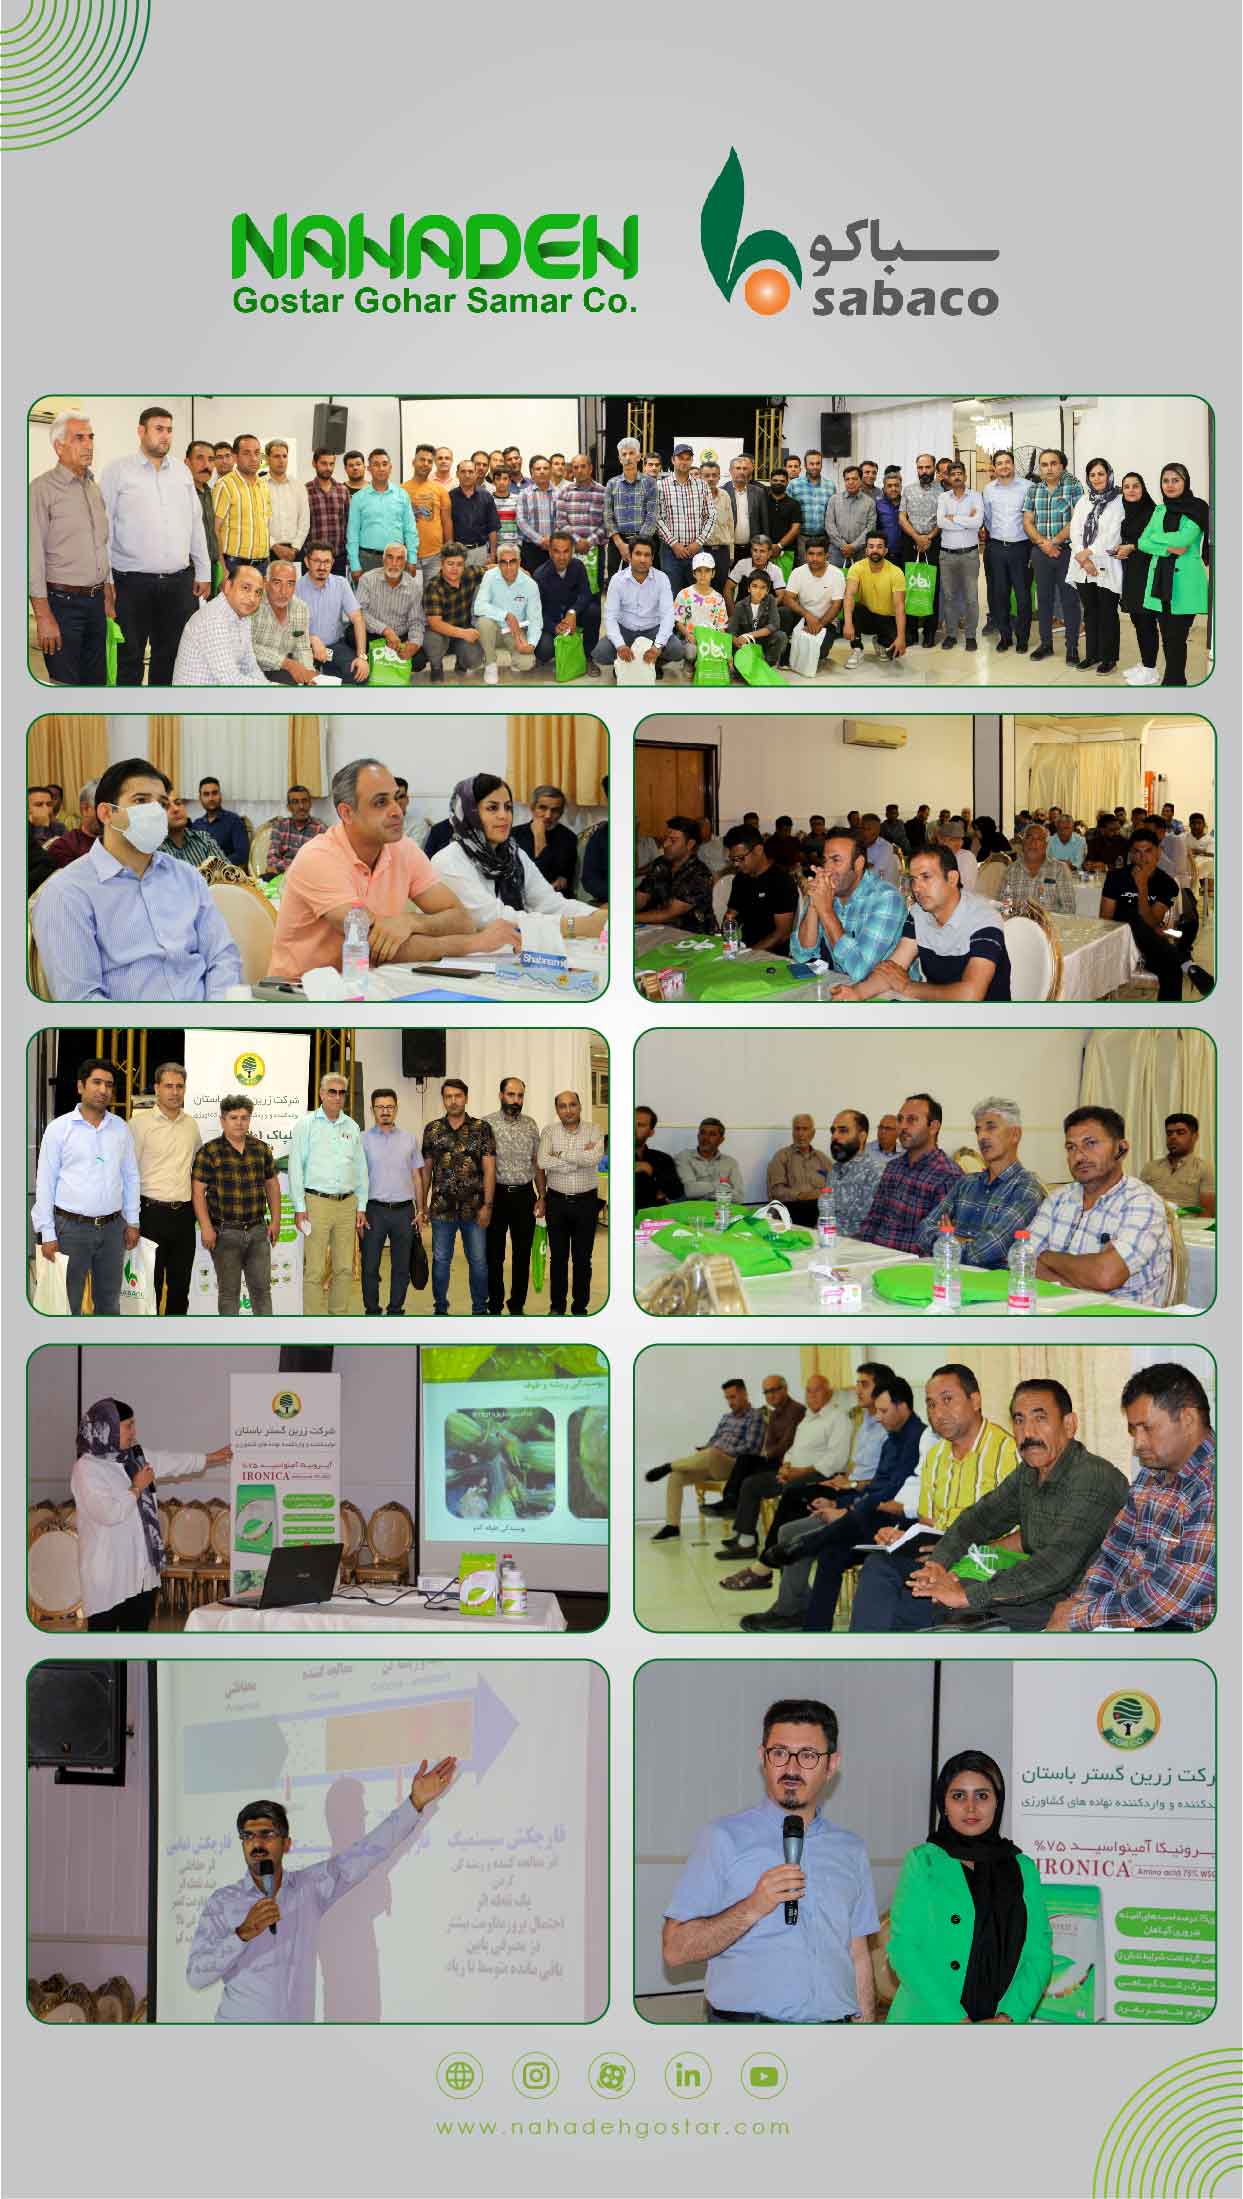 A seminar on the challenges of plant medicine and nutrition in cooperation with Sabaco Darab